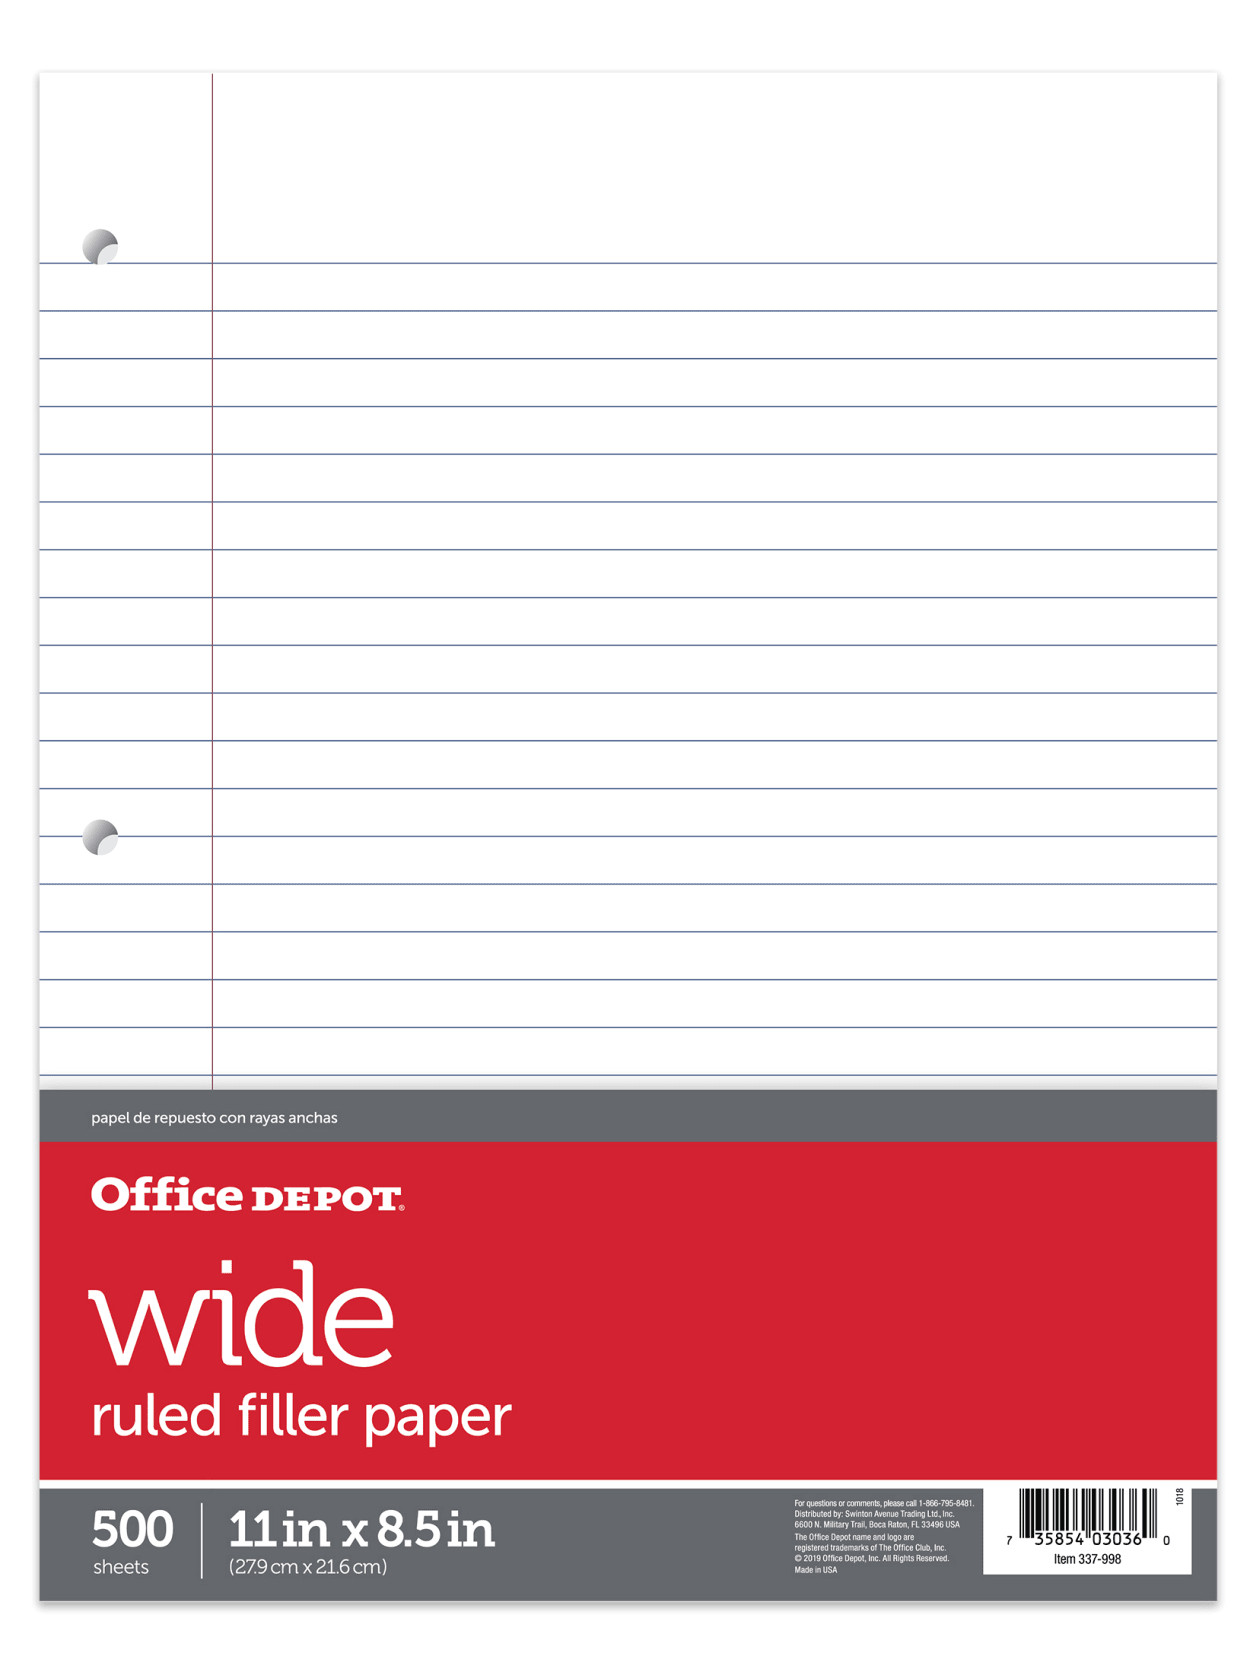 Miami Dade Easy Card Prices Office Depot Brand Ruled Filler Paper 11 X 8 12 3 Hole